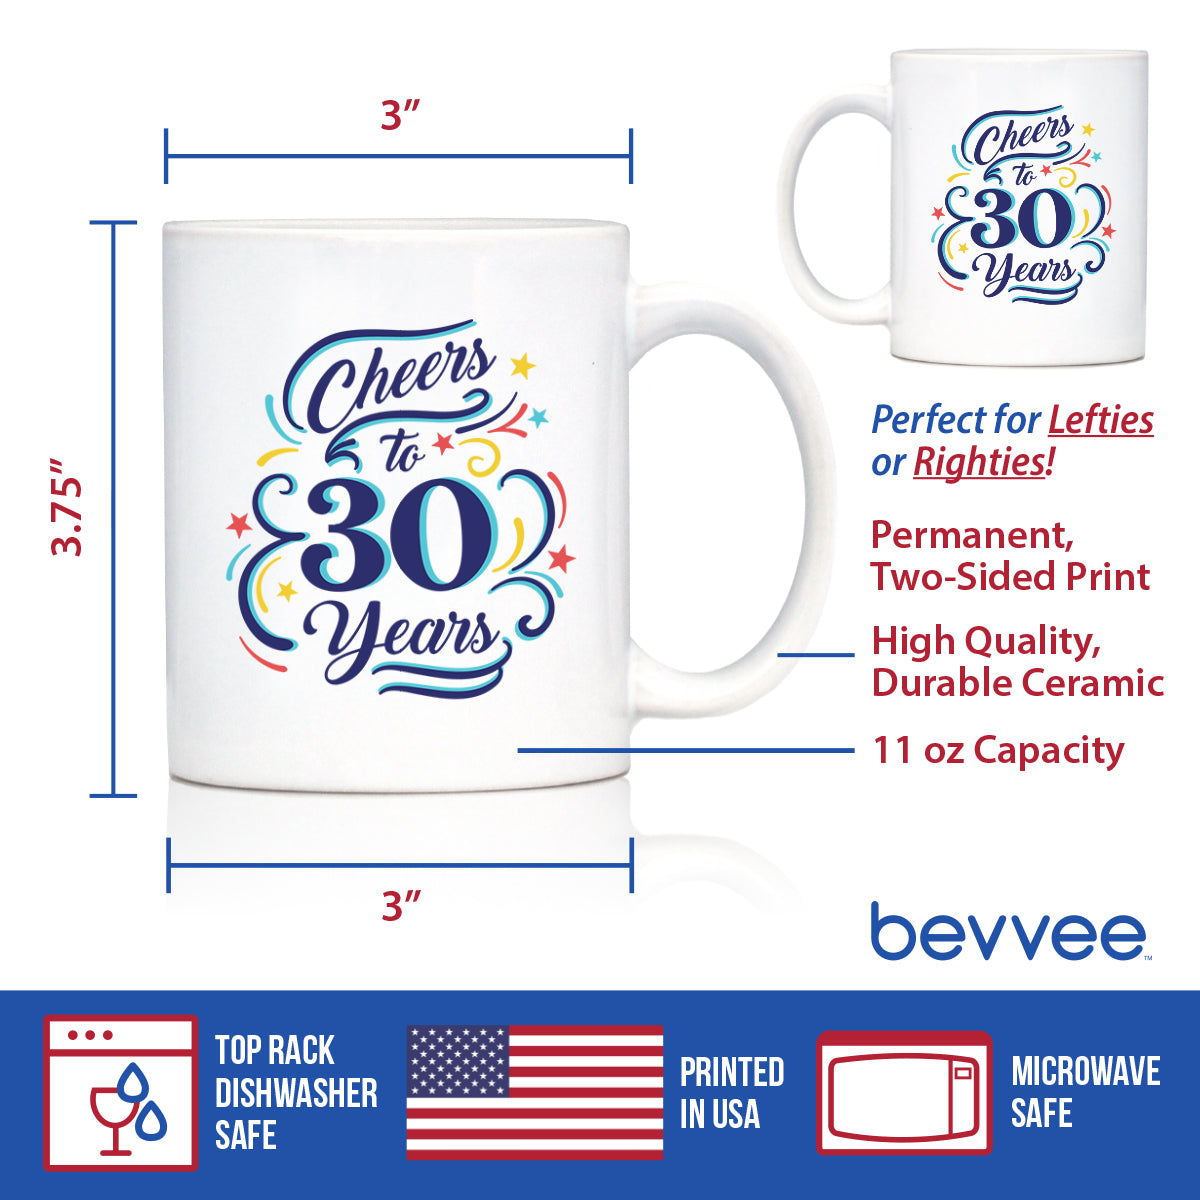 Cheers to 30 Years - Coffee Mug Gifts for Women &amp; Men - 30th Anniversary Party Decor